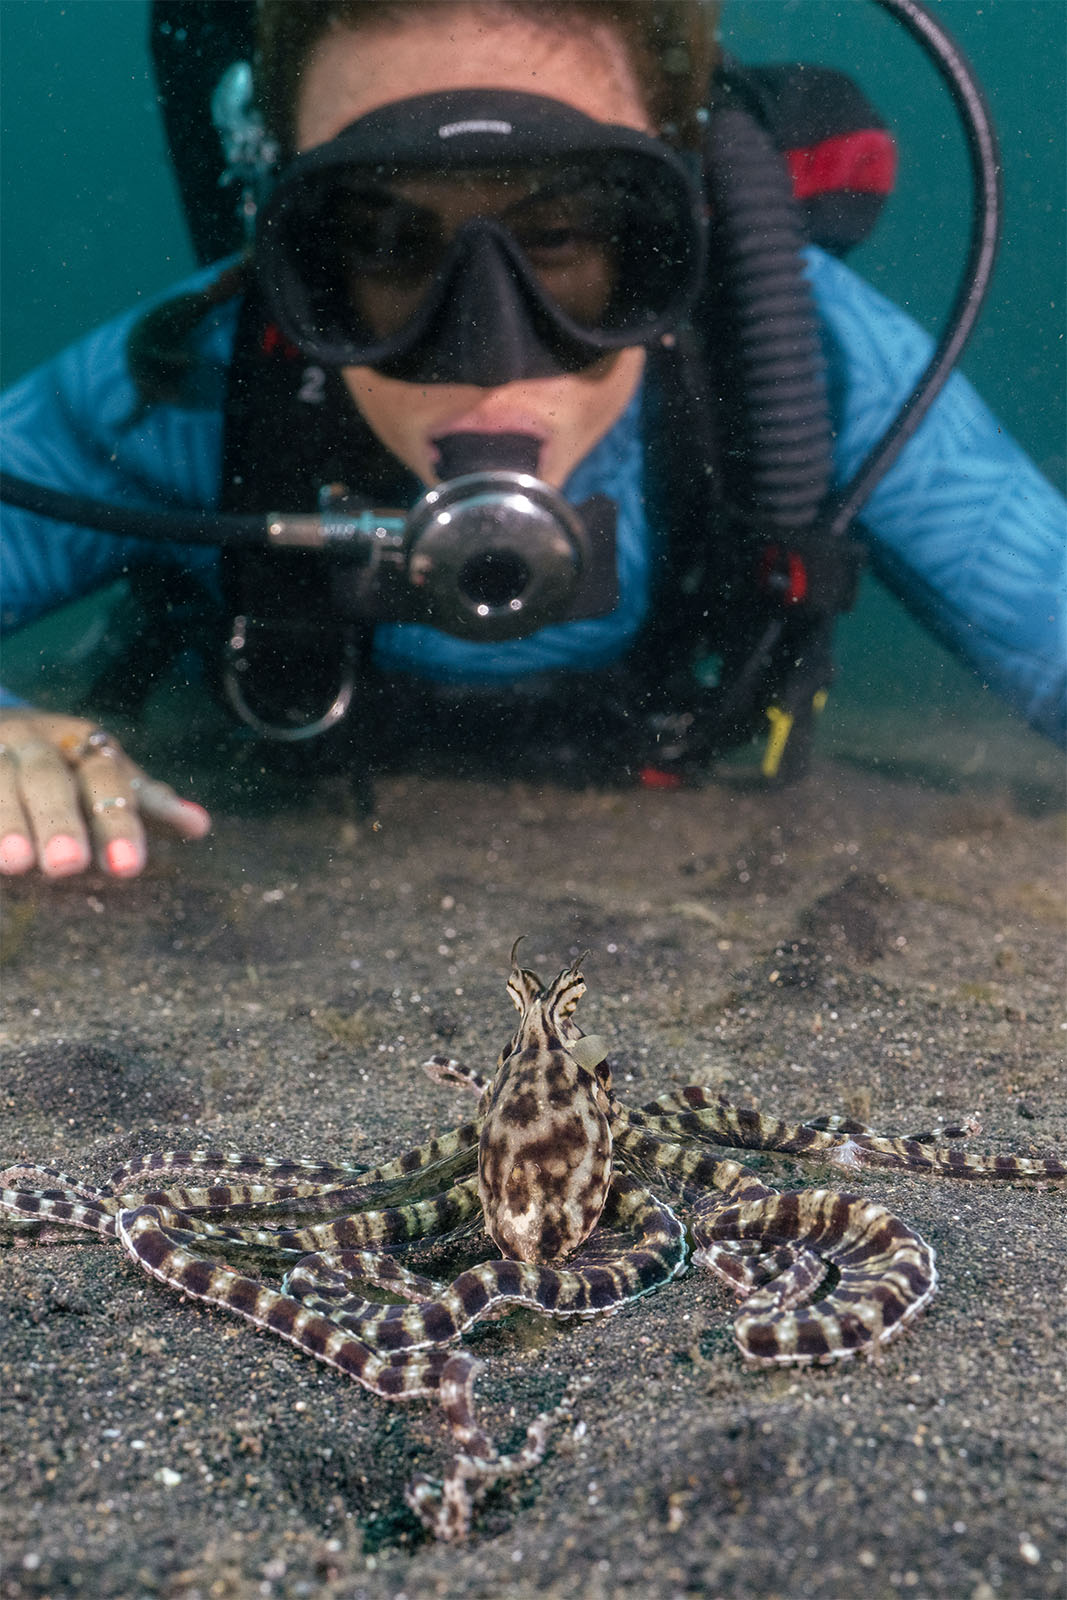 A diver with a mask and breathing apparatus observes a mimic octopus on the ocean floor, its tentacles spread out in a star-like pattern on sandy terrain.